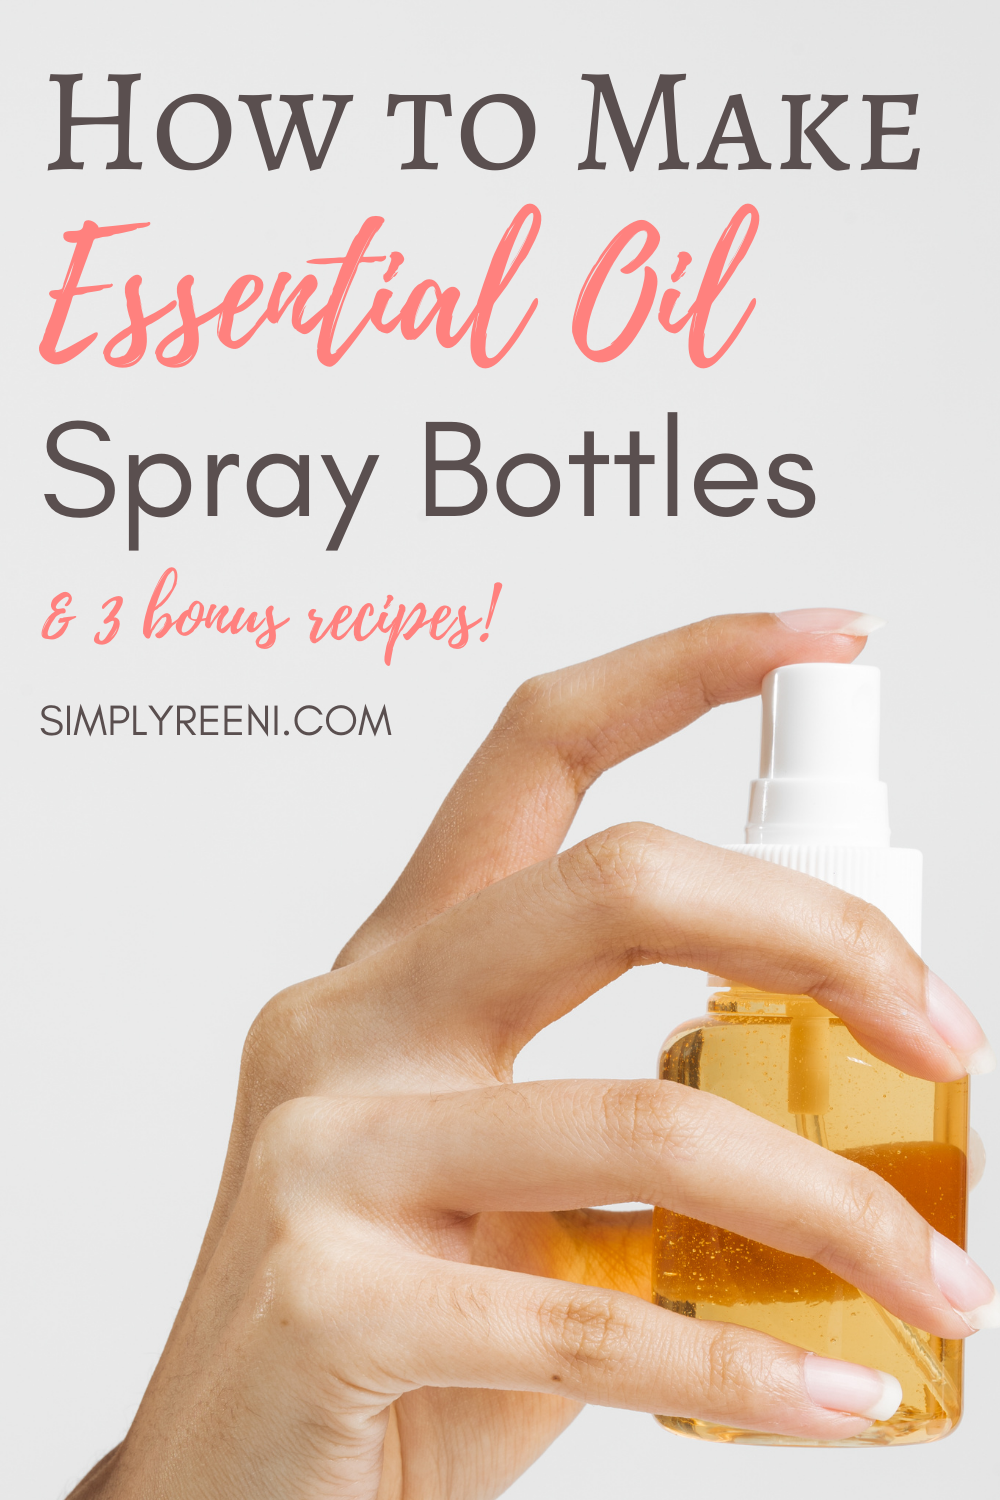 How to Make Essential Oil Spray Bottles & Recipes